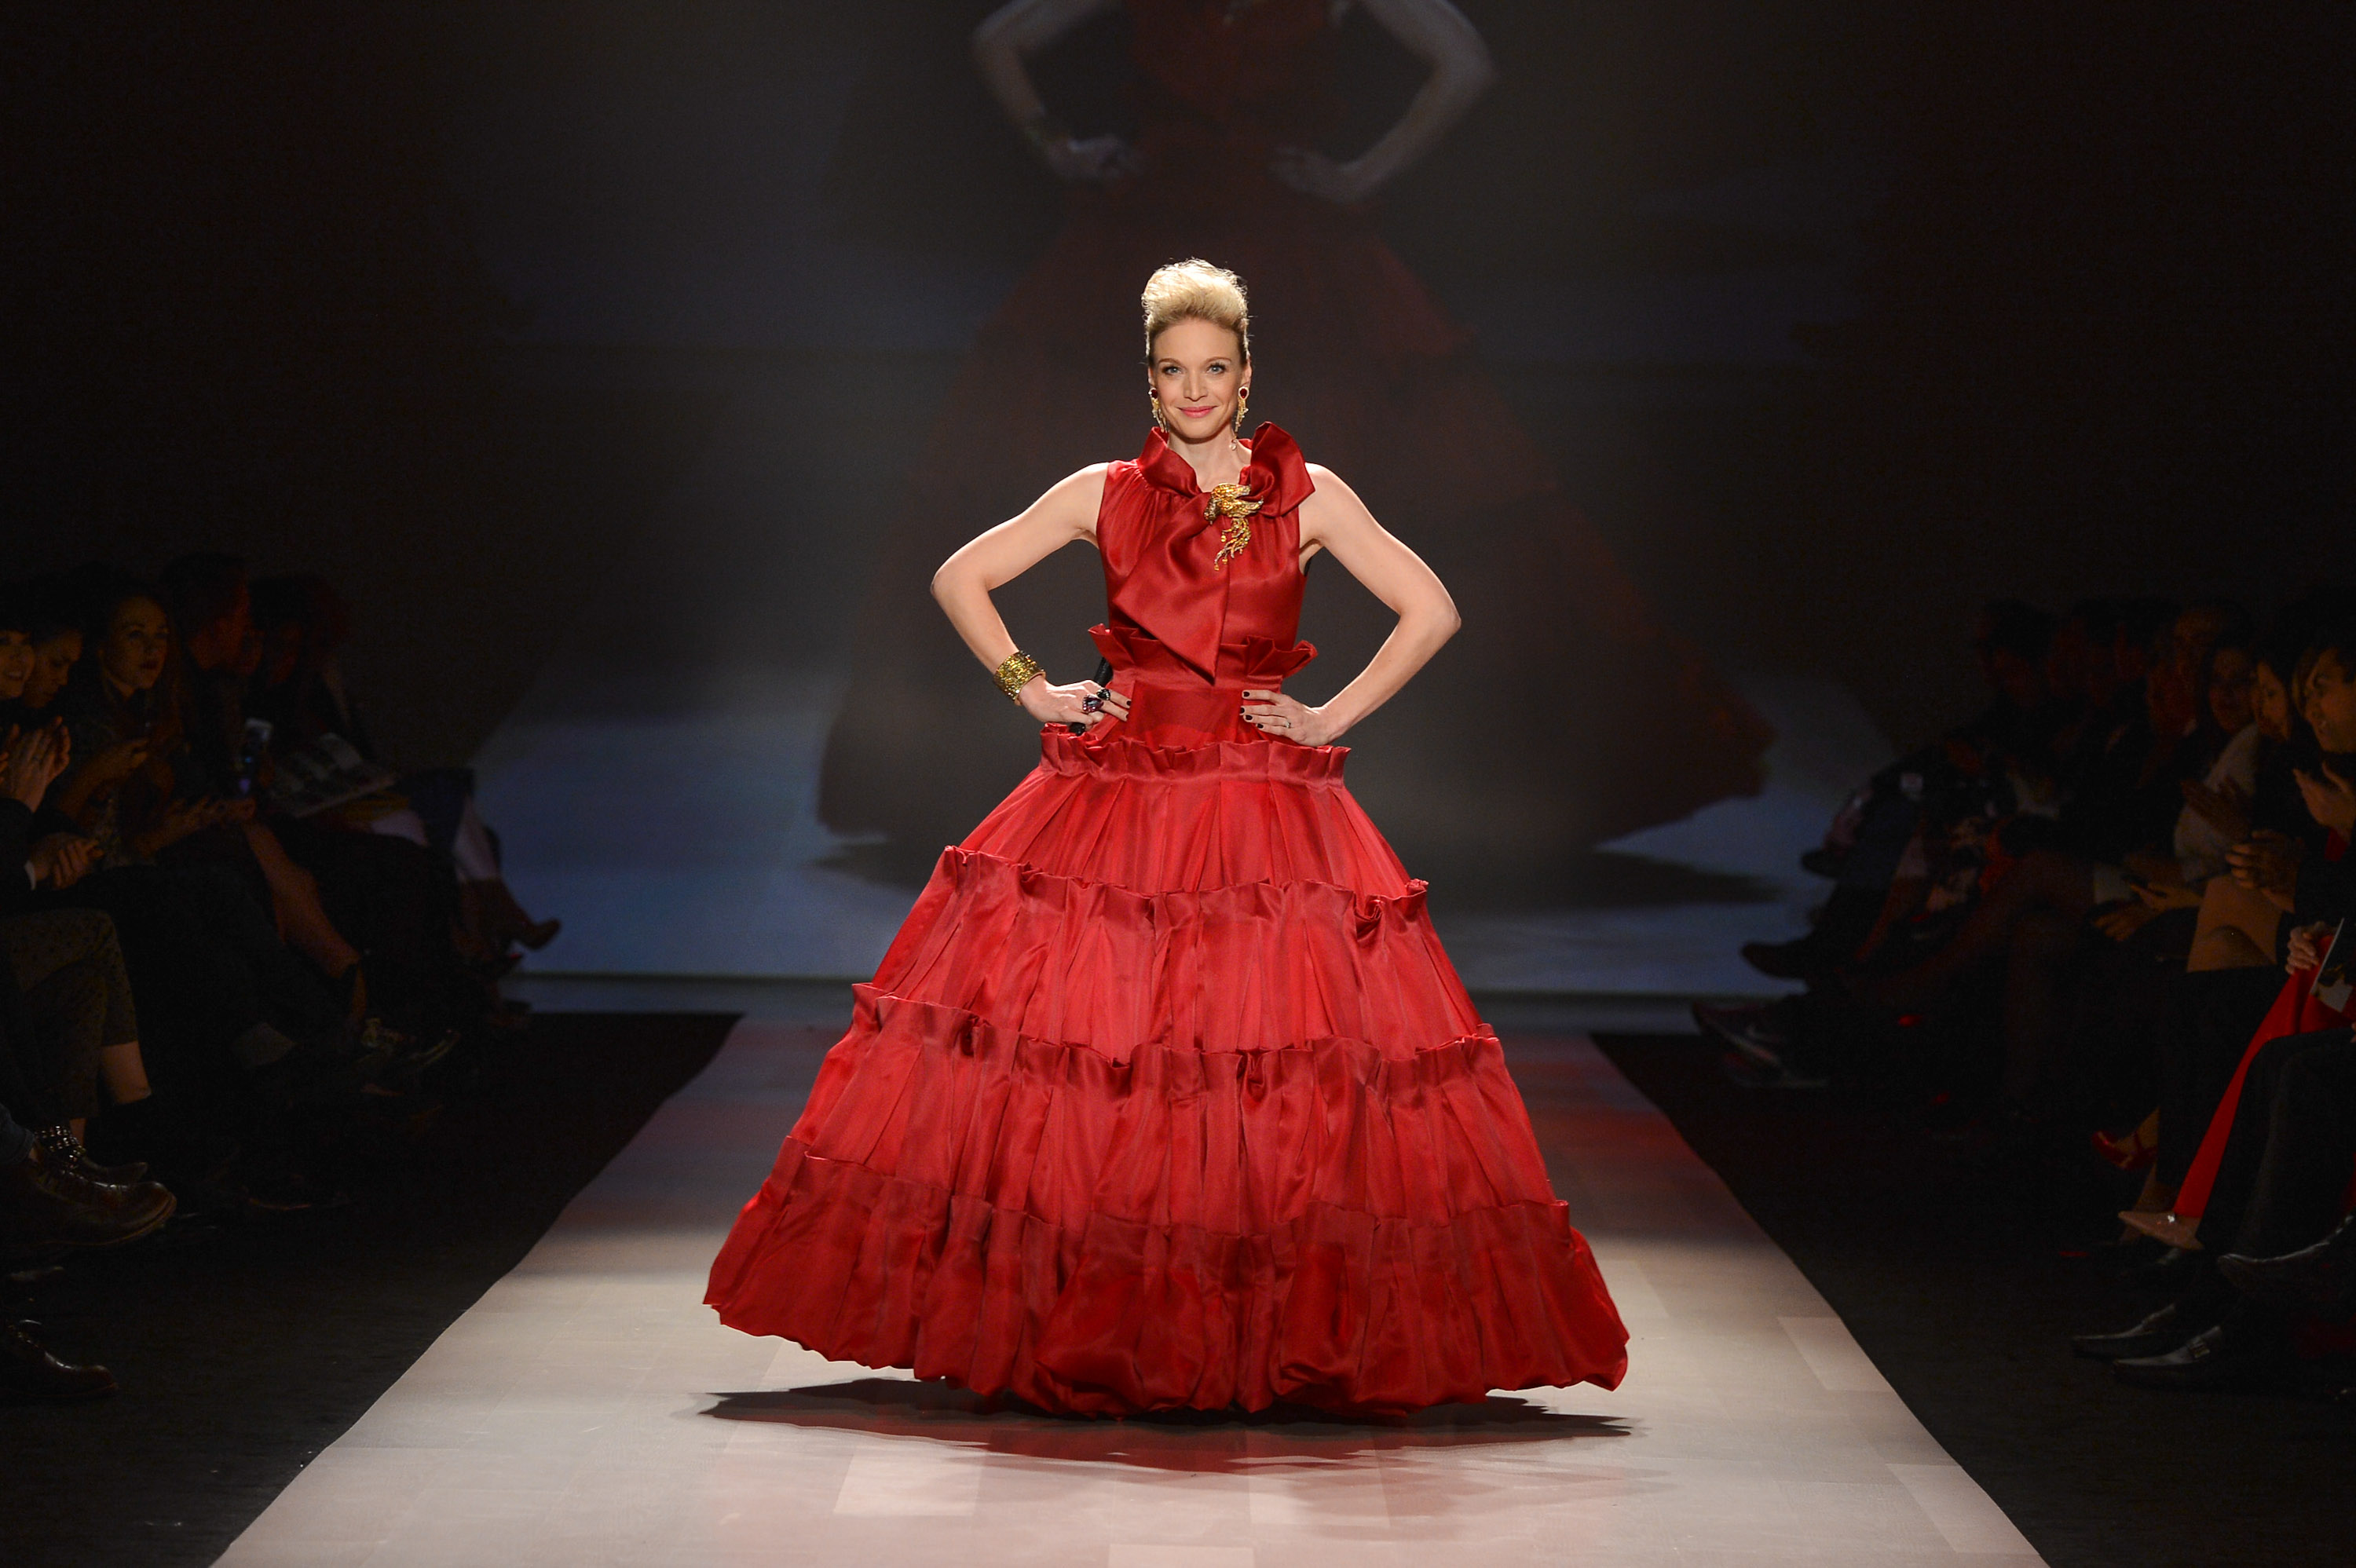 Red rules runway at Heart Truth Fashion Show